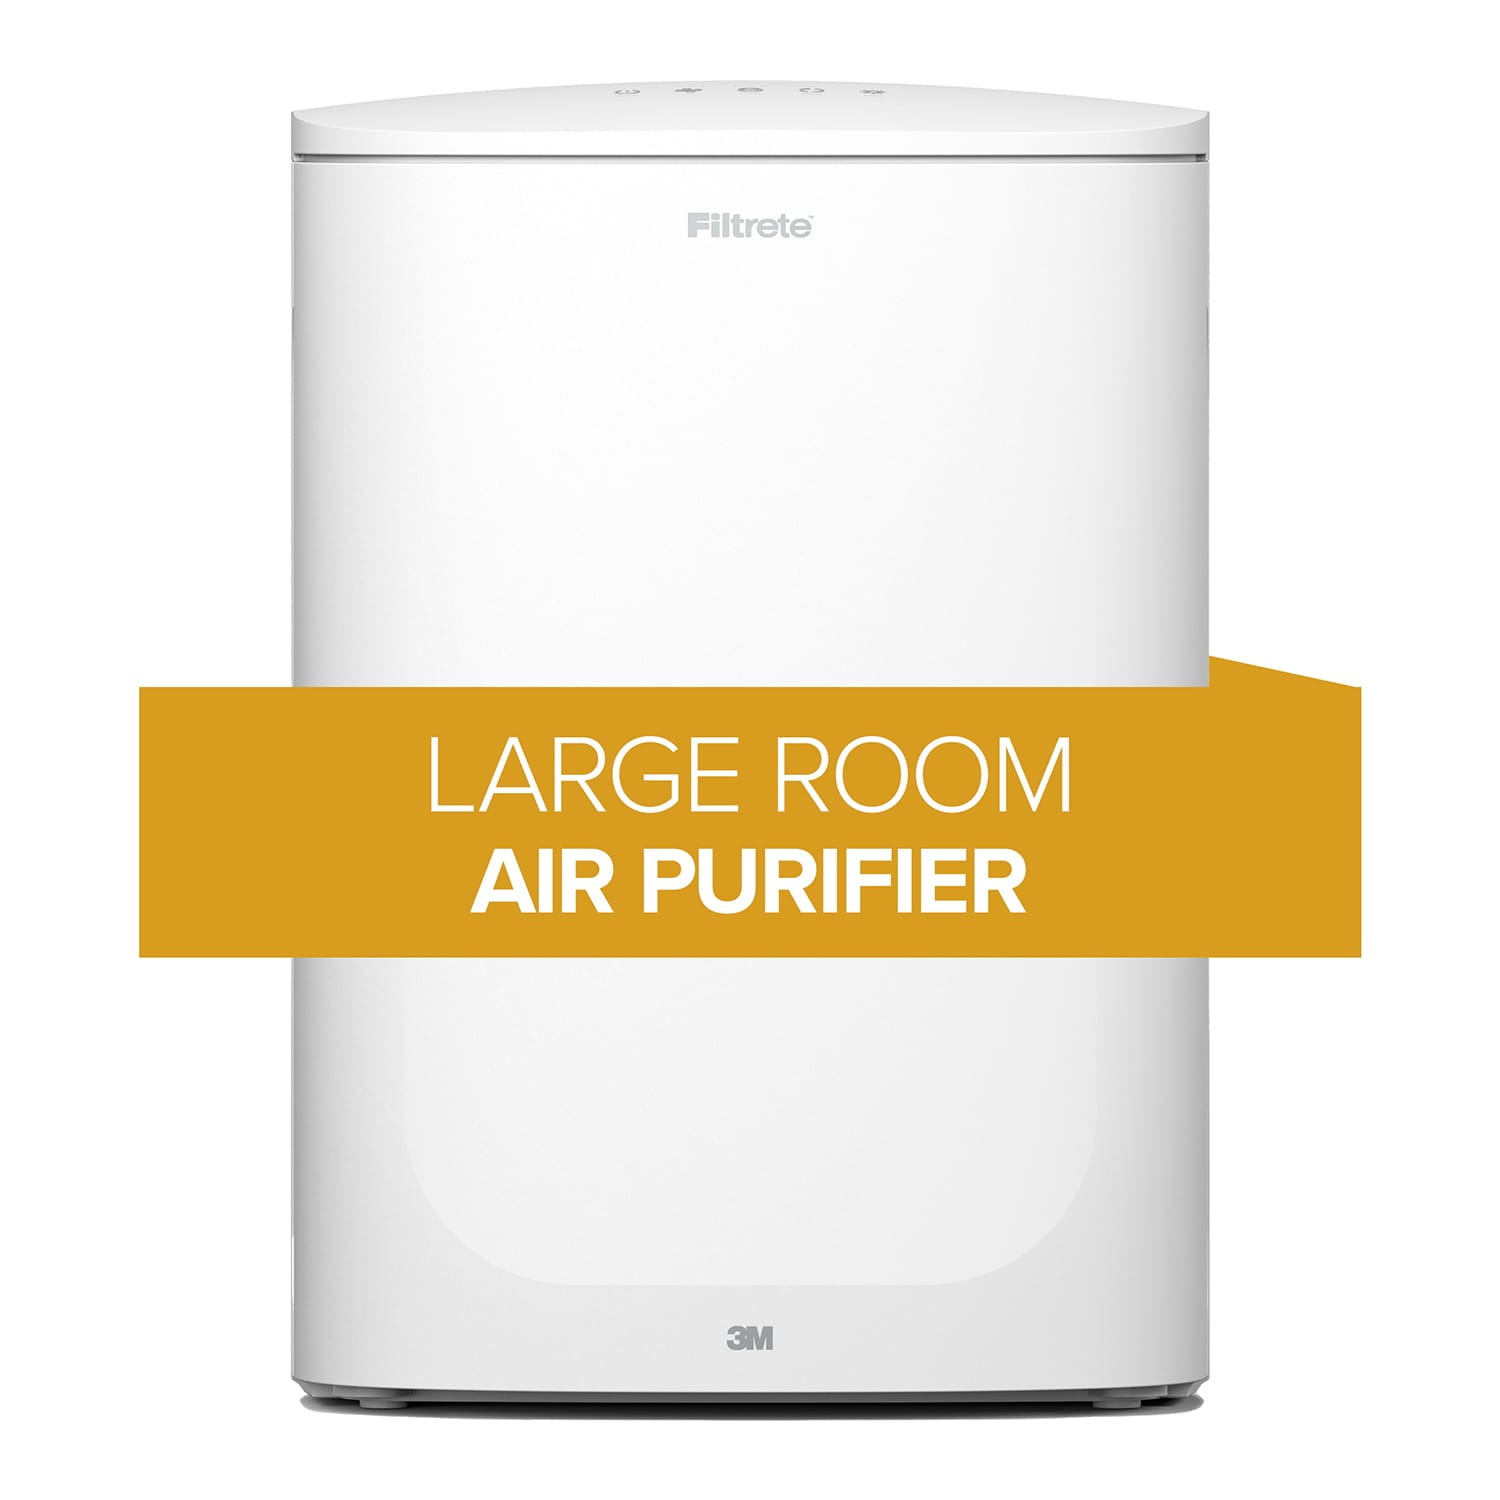 Room air purifiers in the COVID-19 era